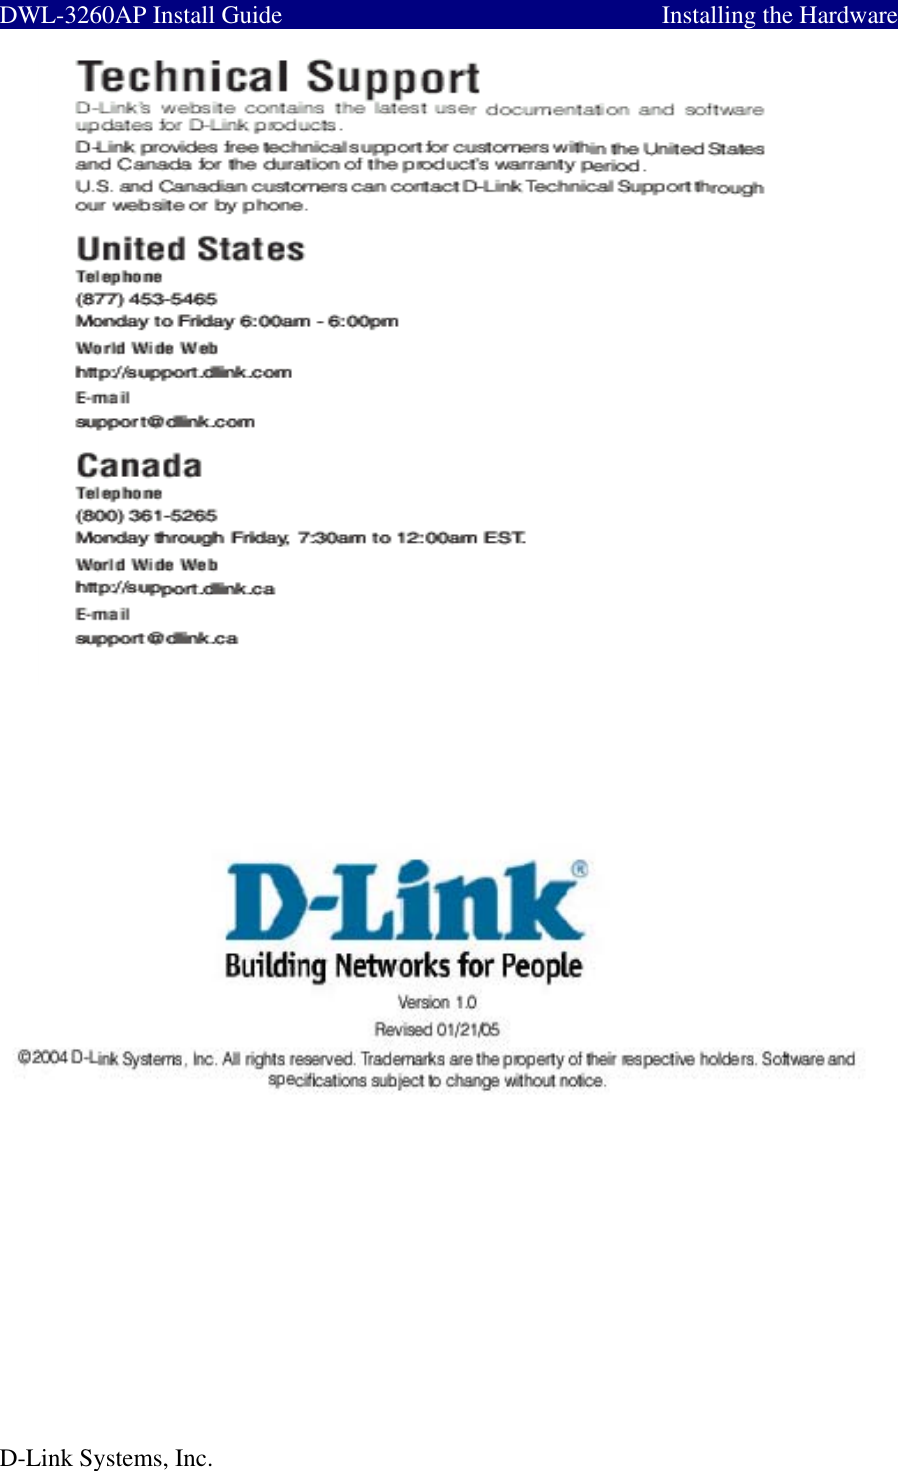  DWL-3260AP Install Guide         Installing the Hardware                             D-Link Systems, Inc. 